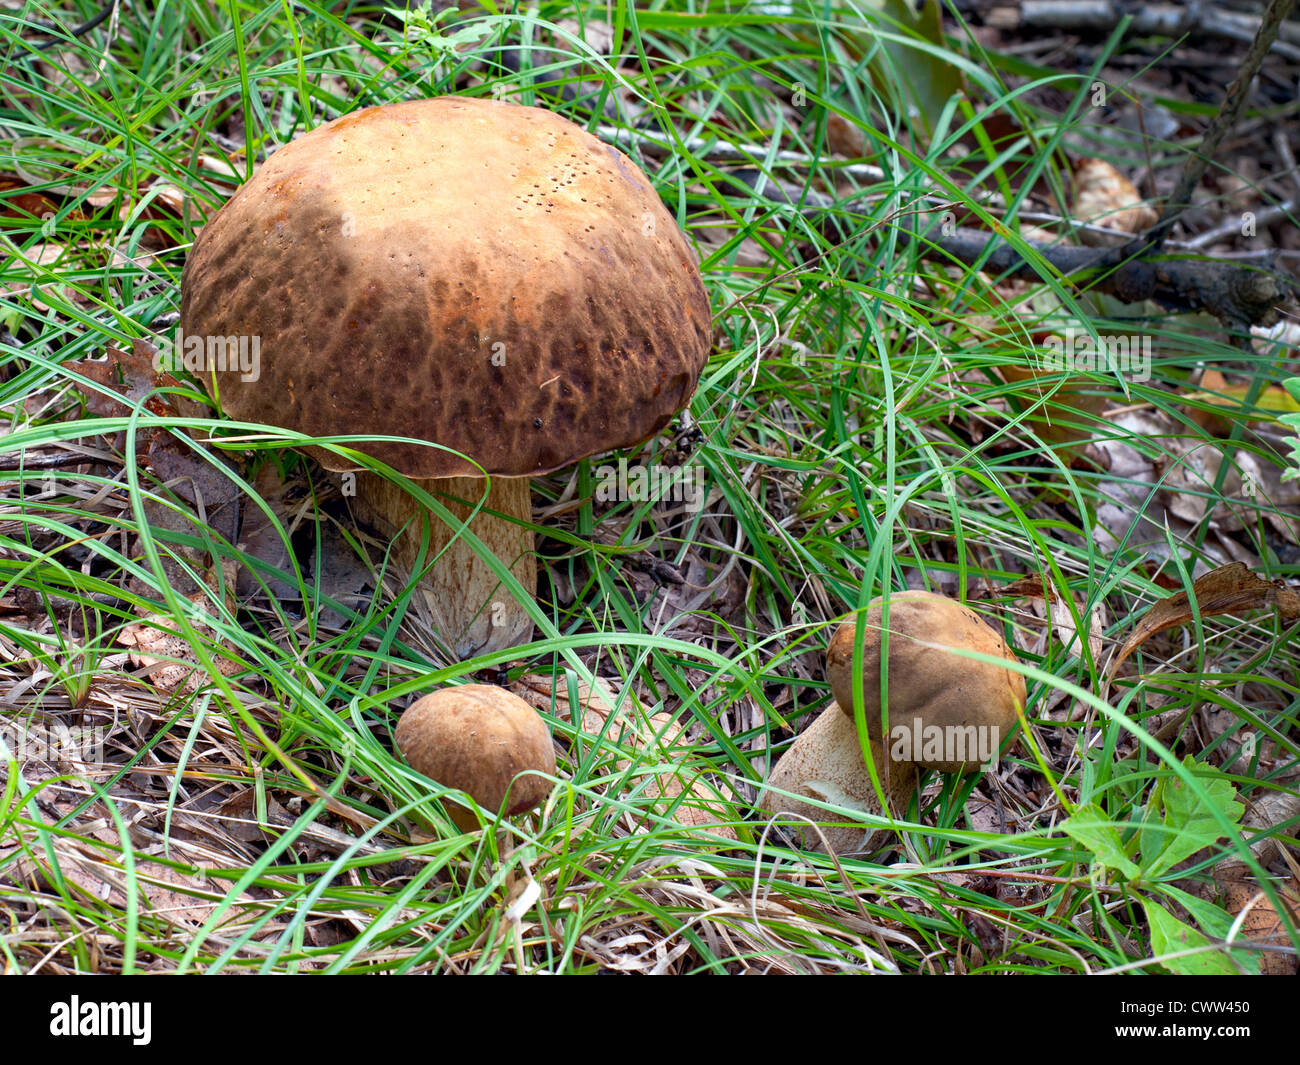 Group of the three Oak Mushrooms in the green grass Stock Photo